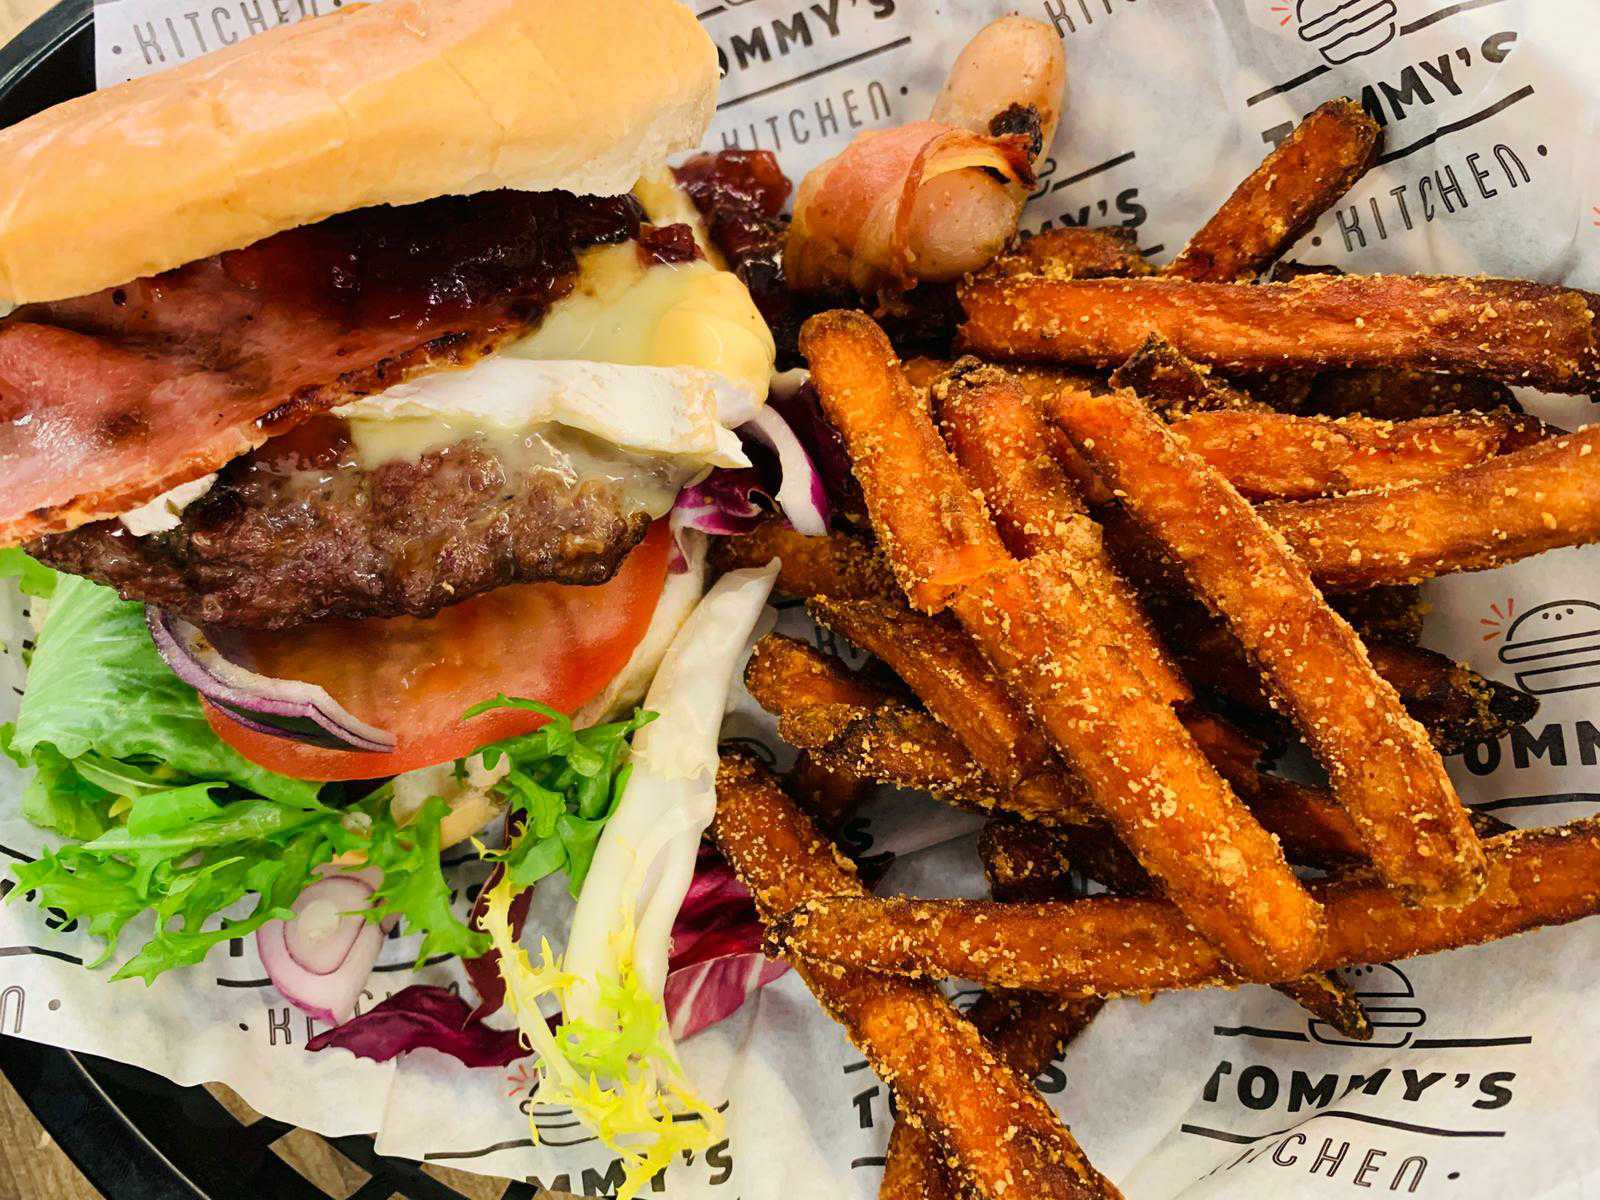 image of a Christmas special beef burger with bacon and brie, served with sweet potato fries